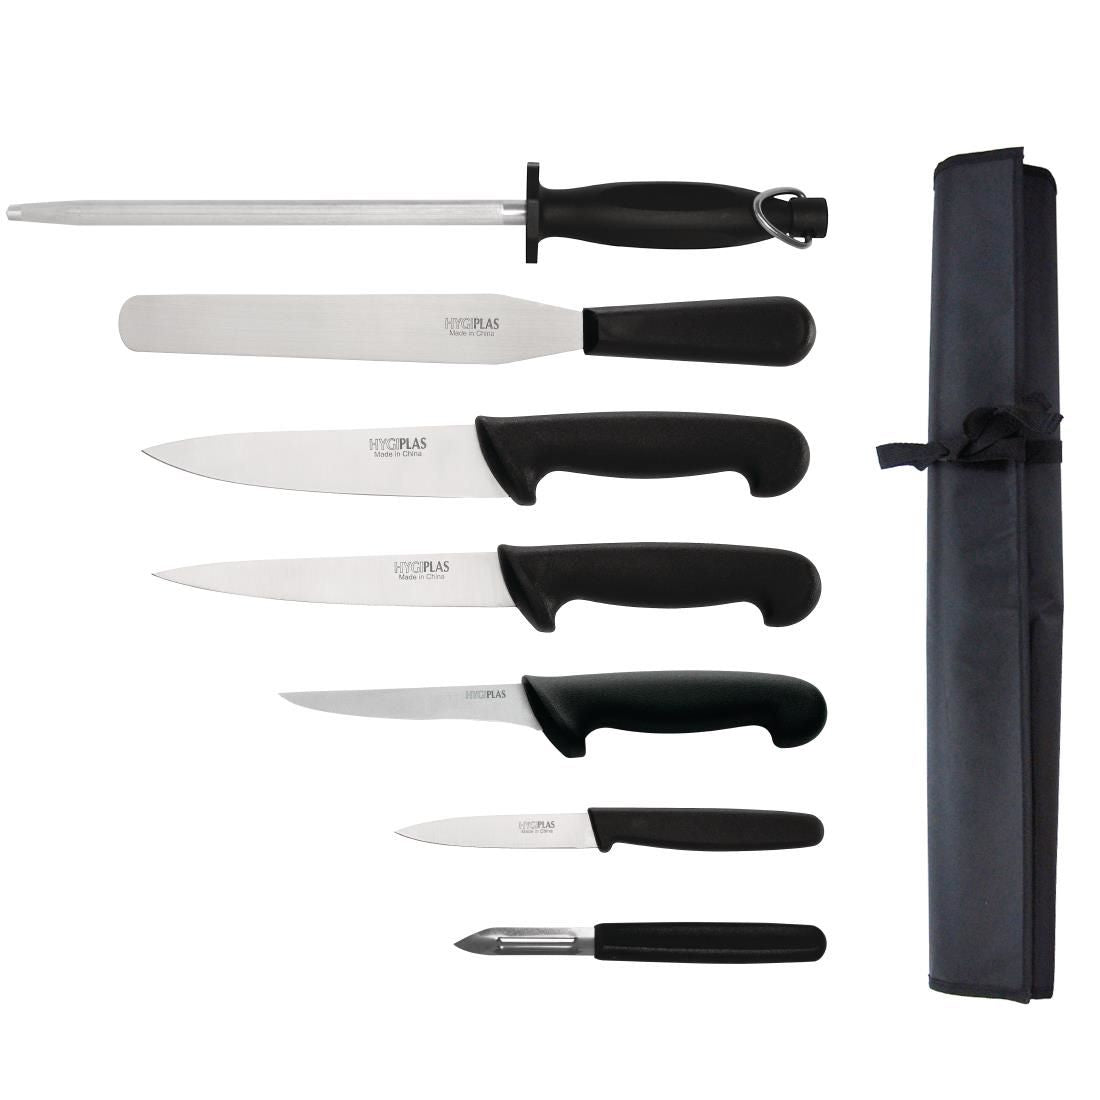 Hygiplas 7 Piece Starter Knife Set With 20cm Chef Knife and Roll Bag JD Catering Equipment Solutions Ltd